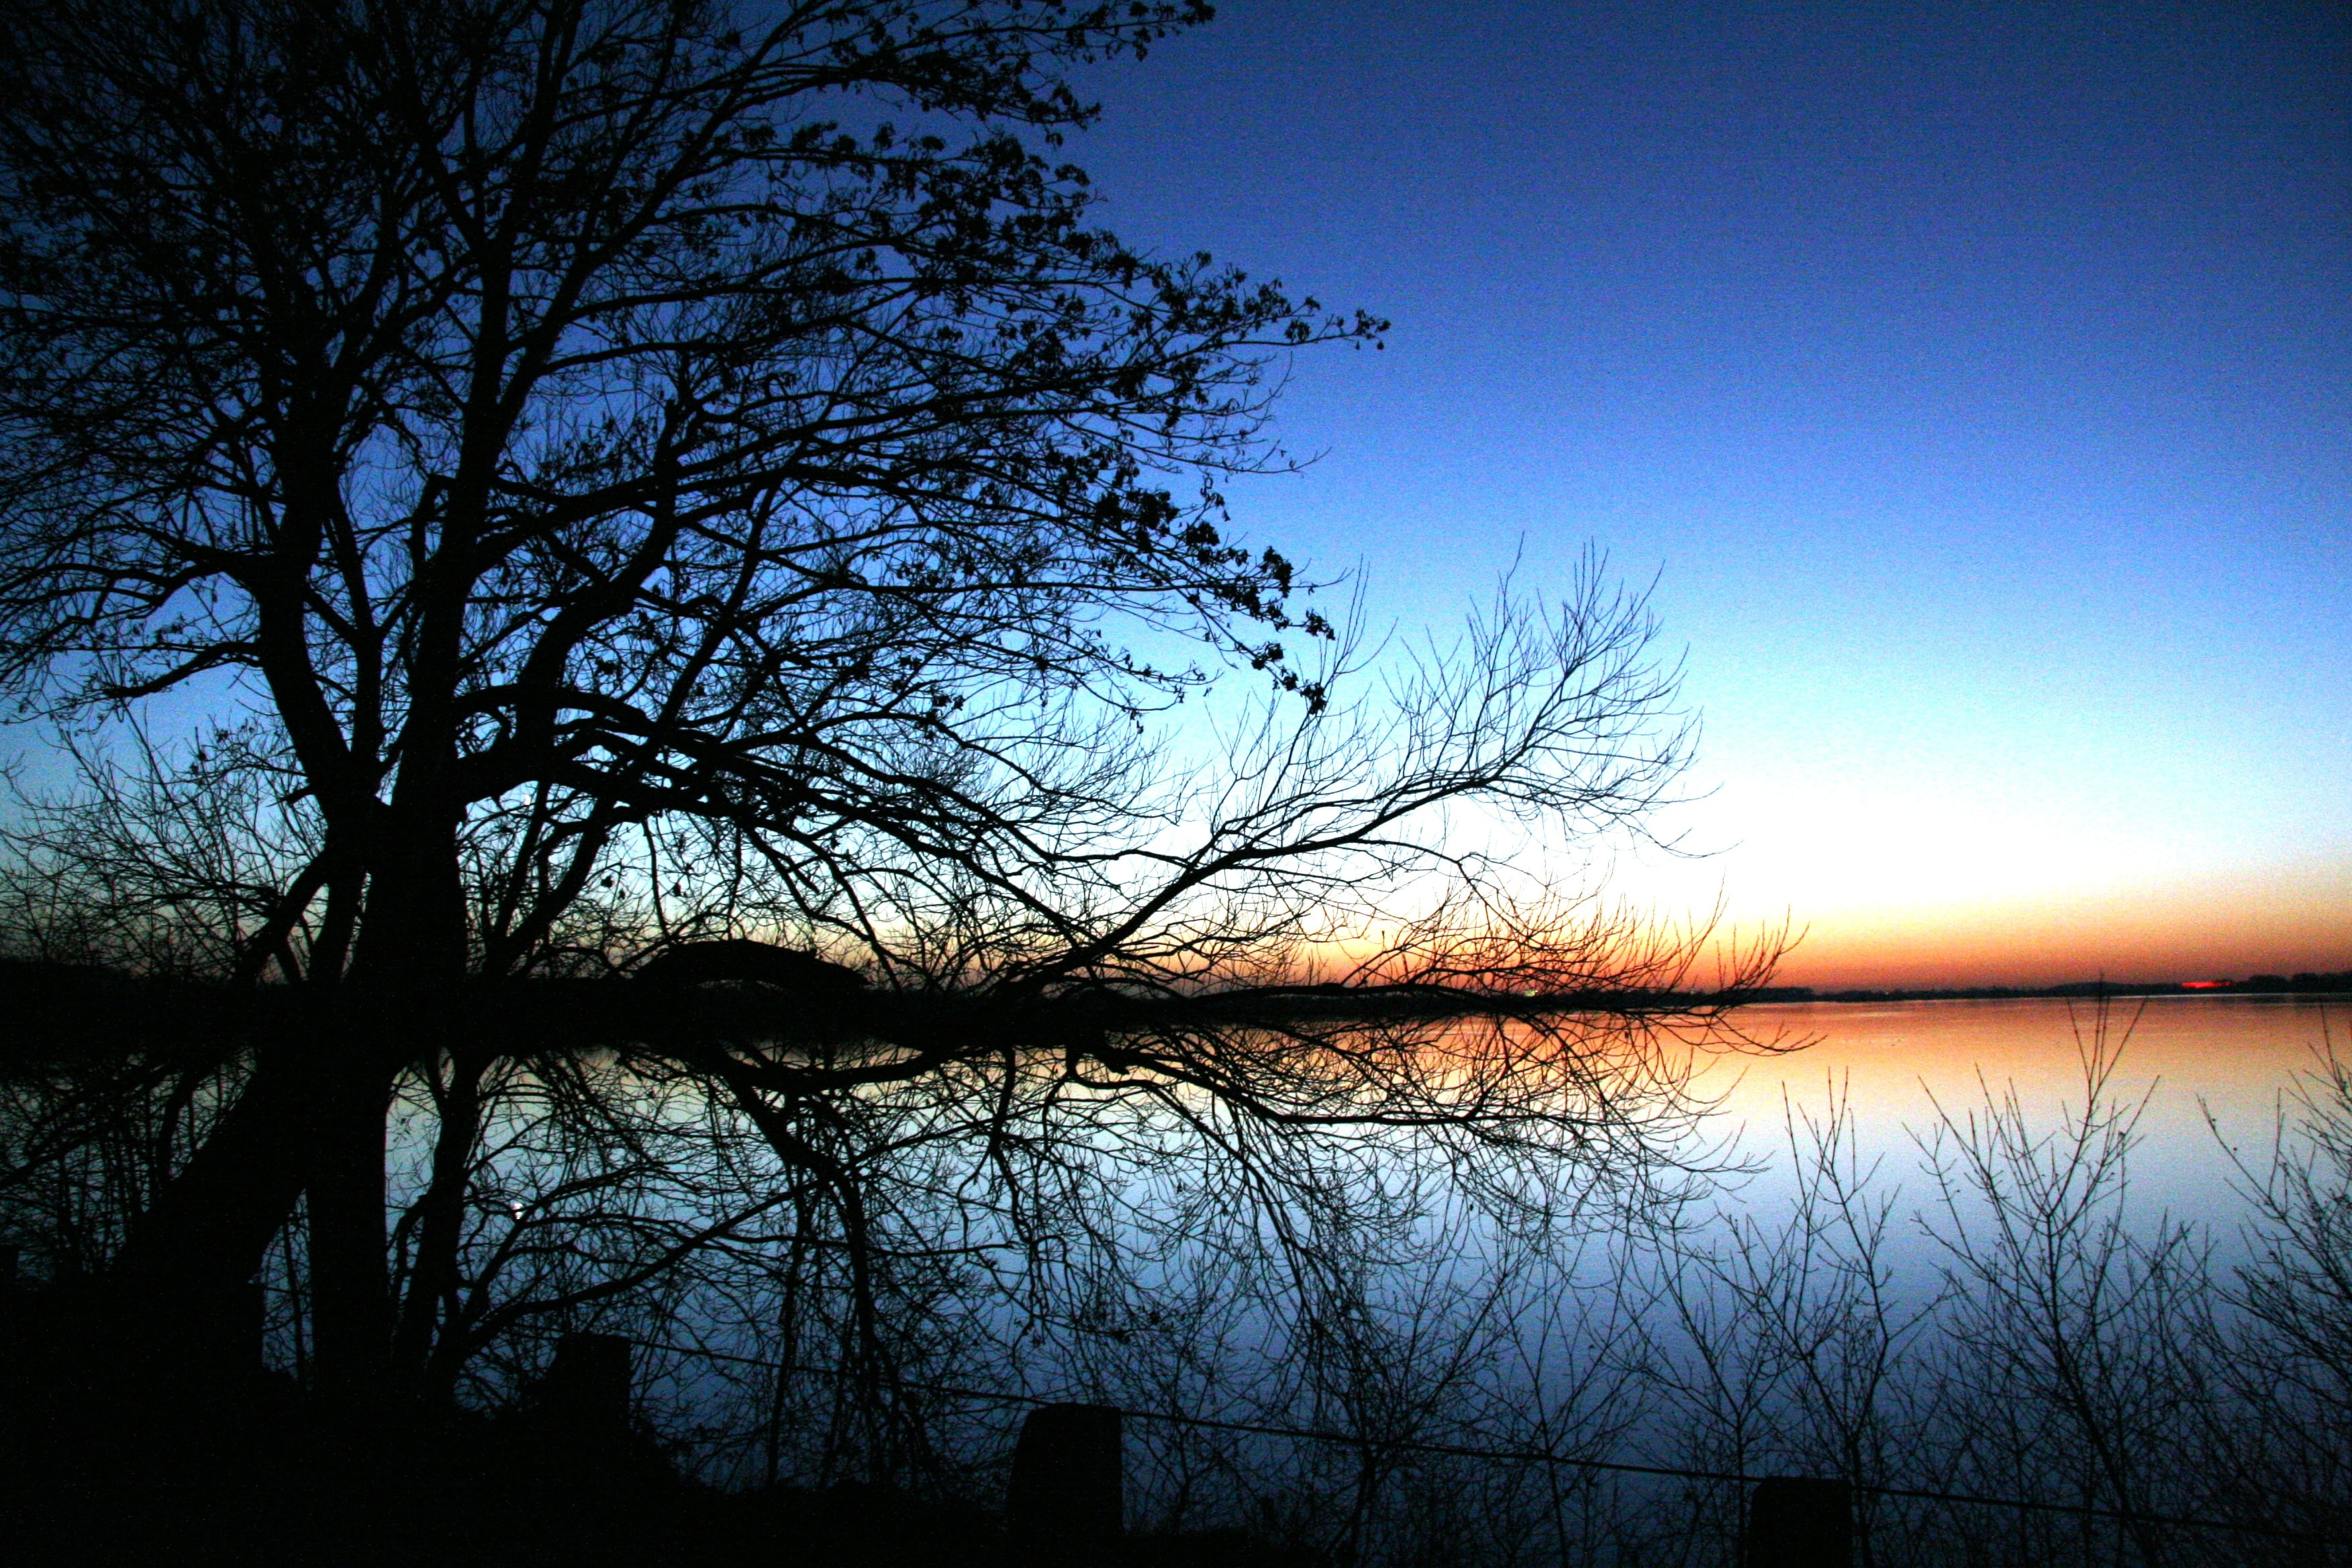 silhouette of bare trees near body of water at golden hour